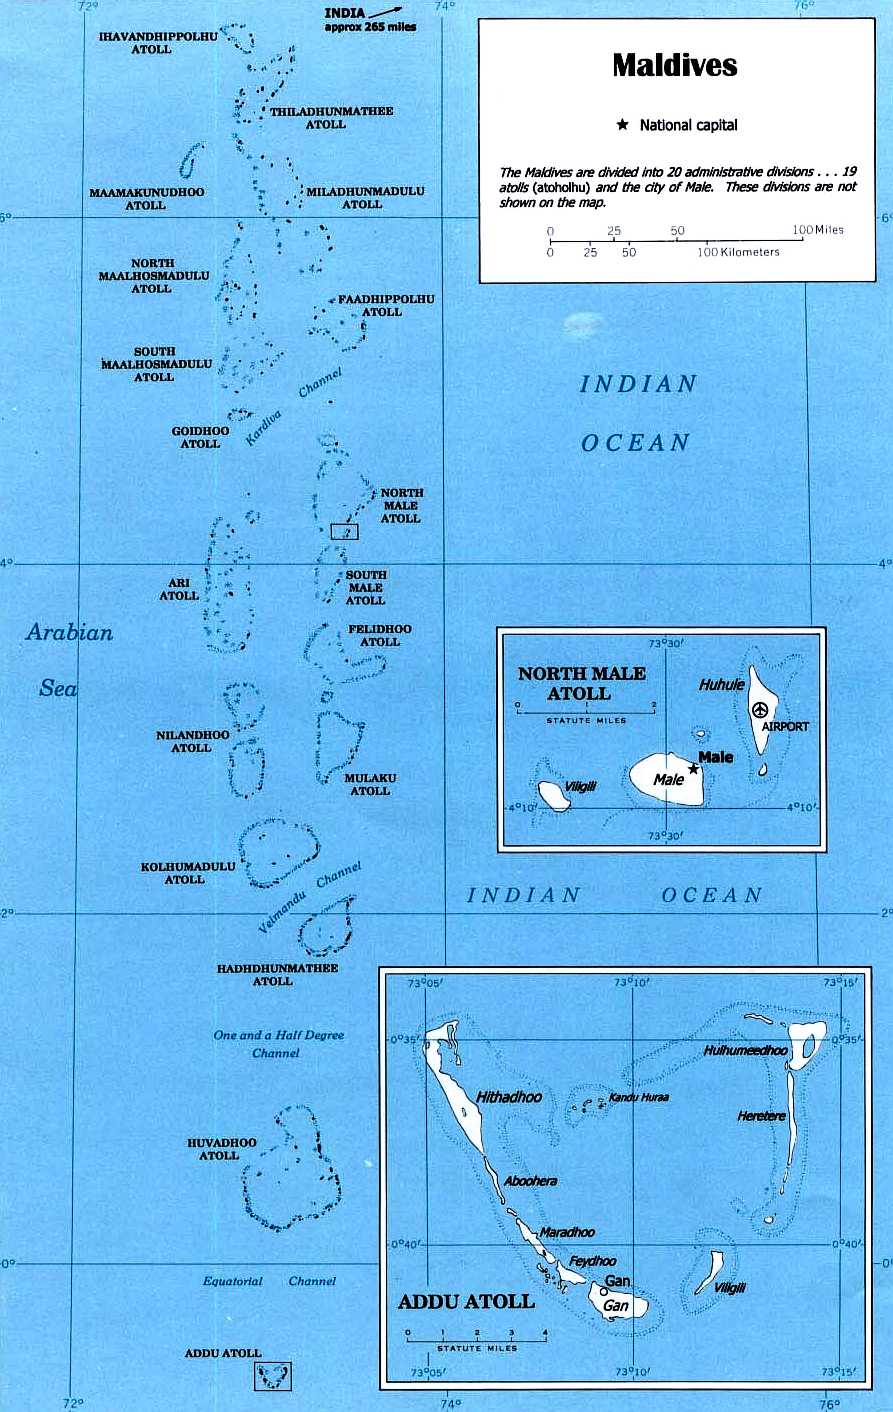 Map of the Maldives in the Indian Ocean